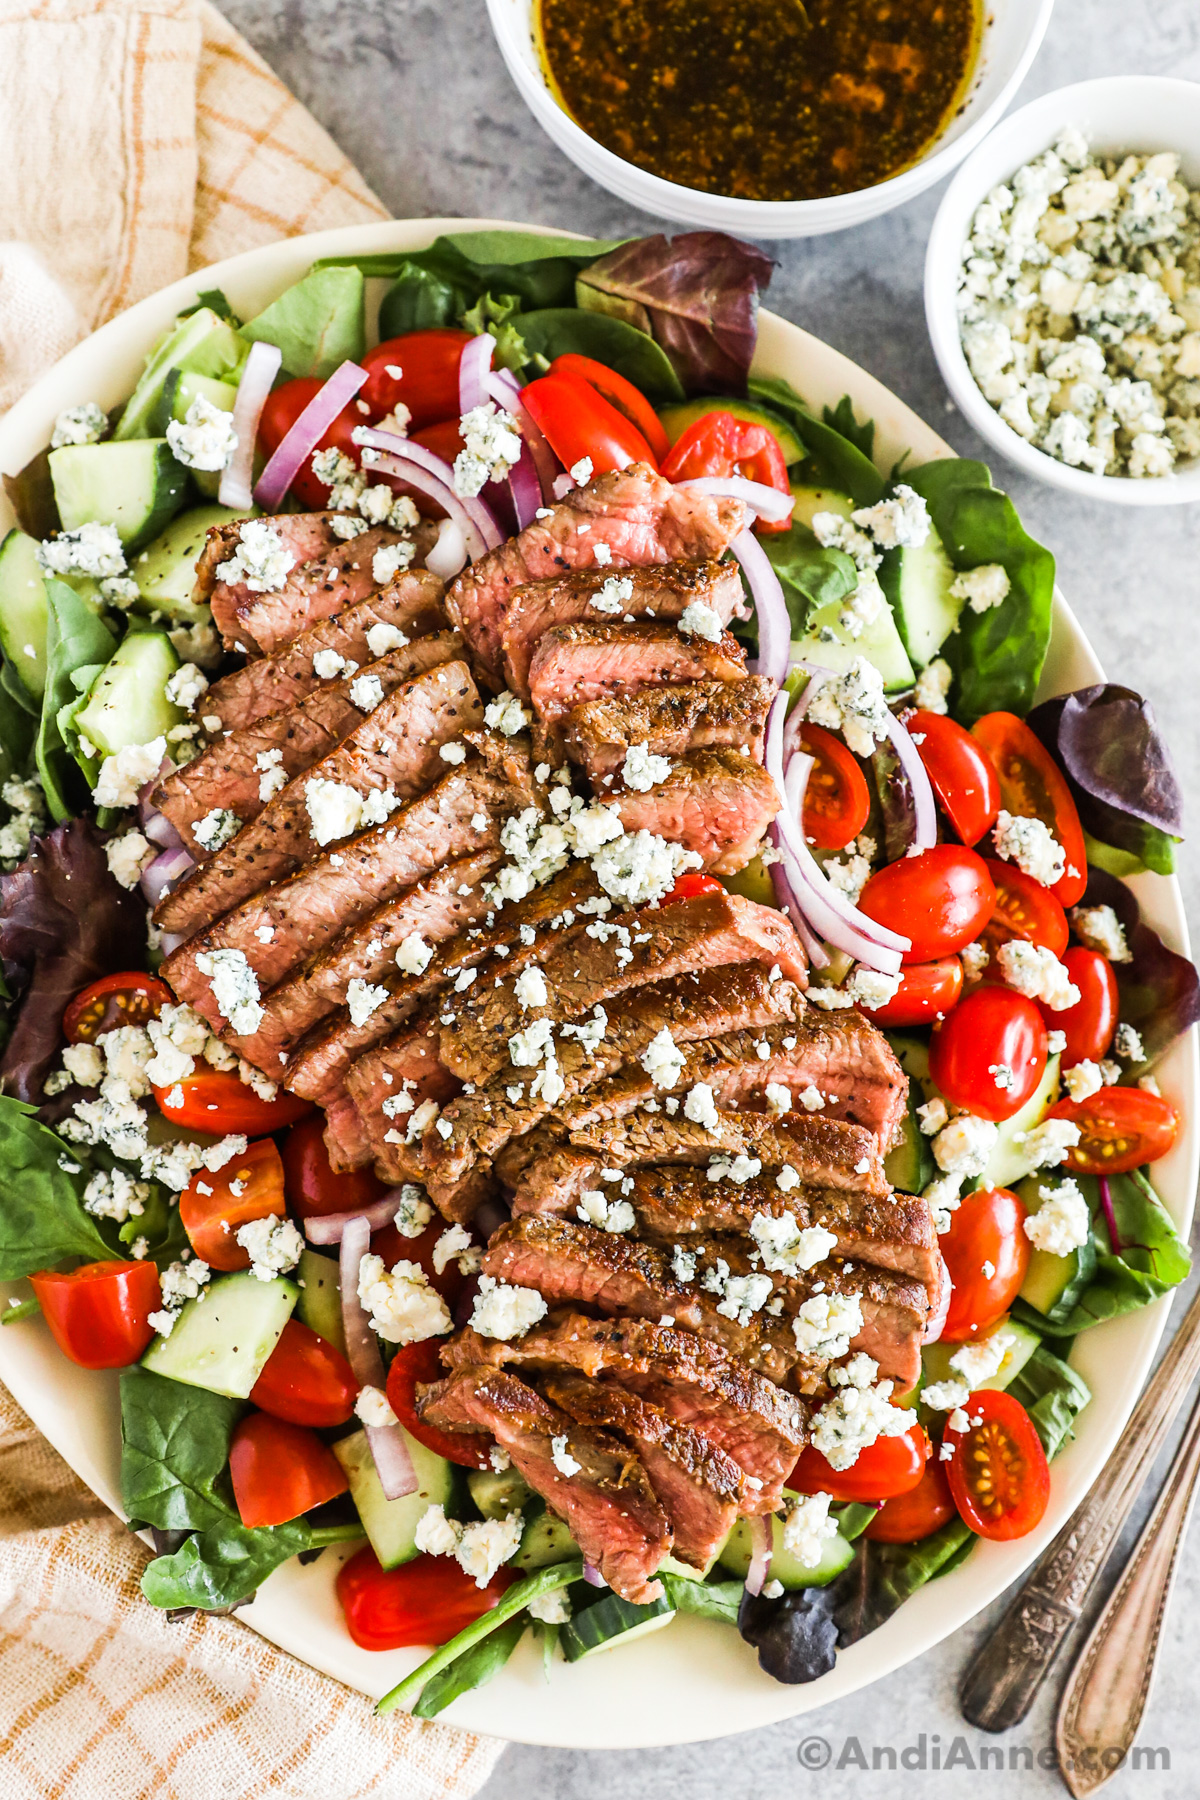 Steak salad recipe with slices of steak, crumbled blue cheese and chopped vegetables.